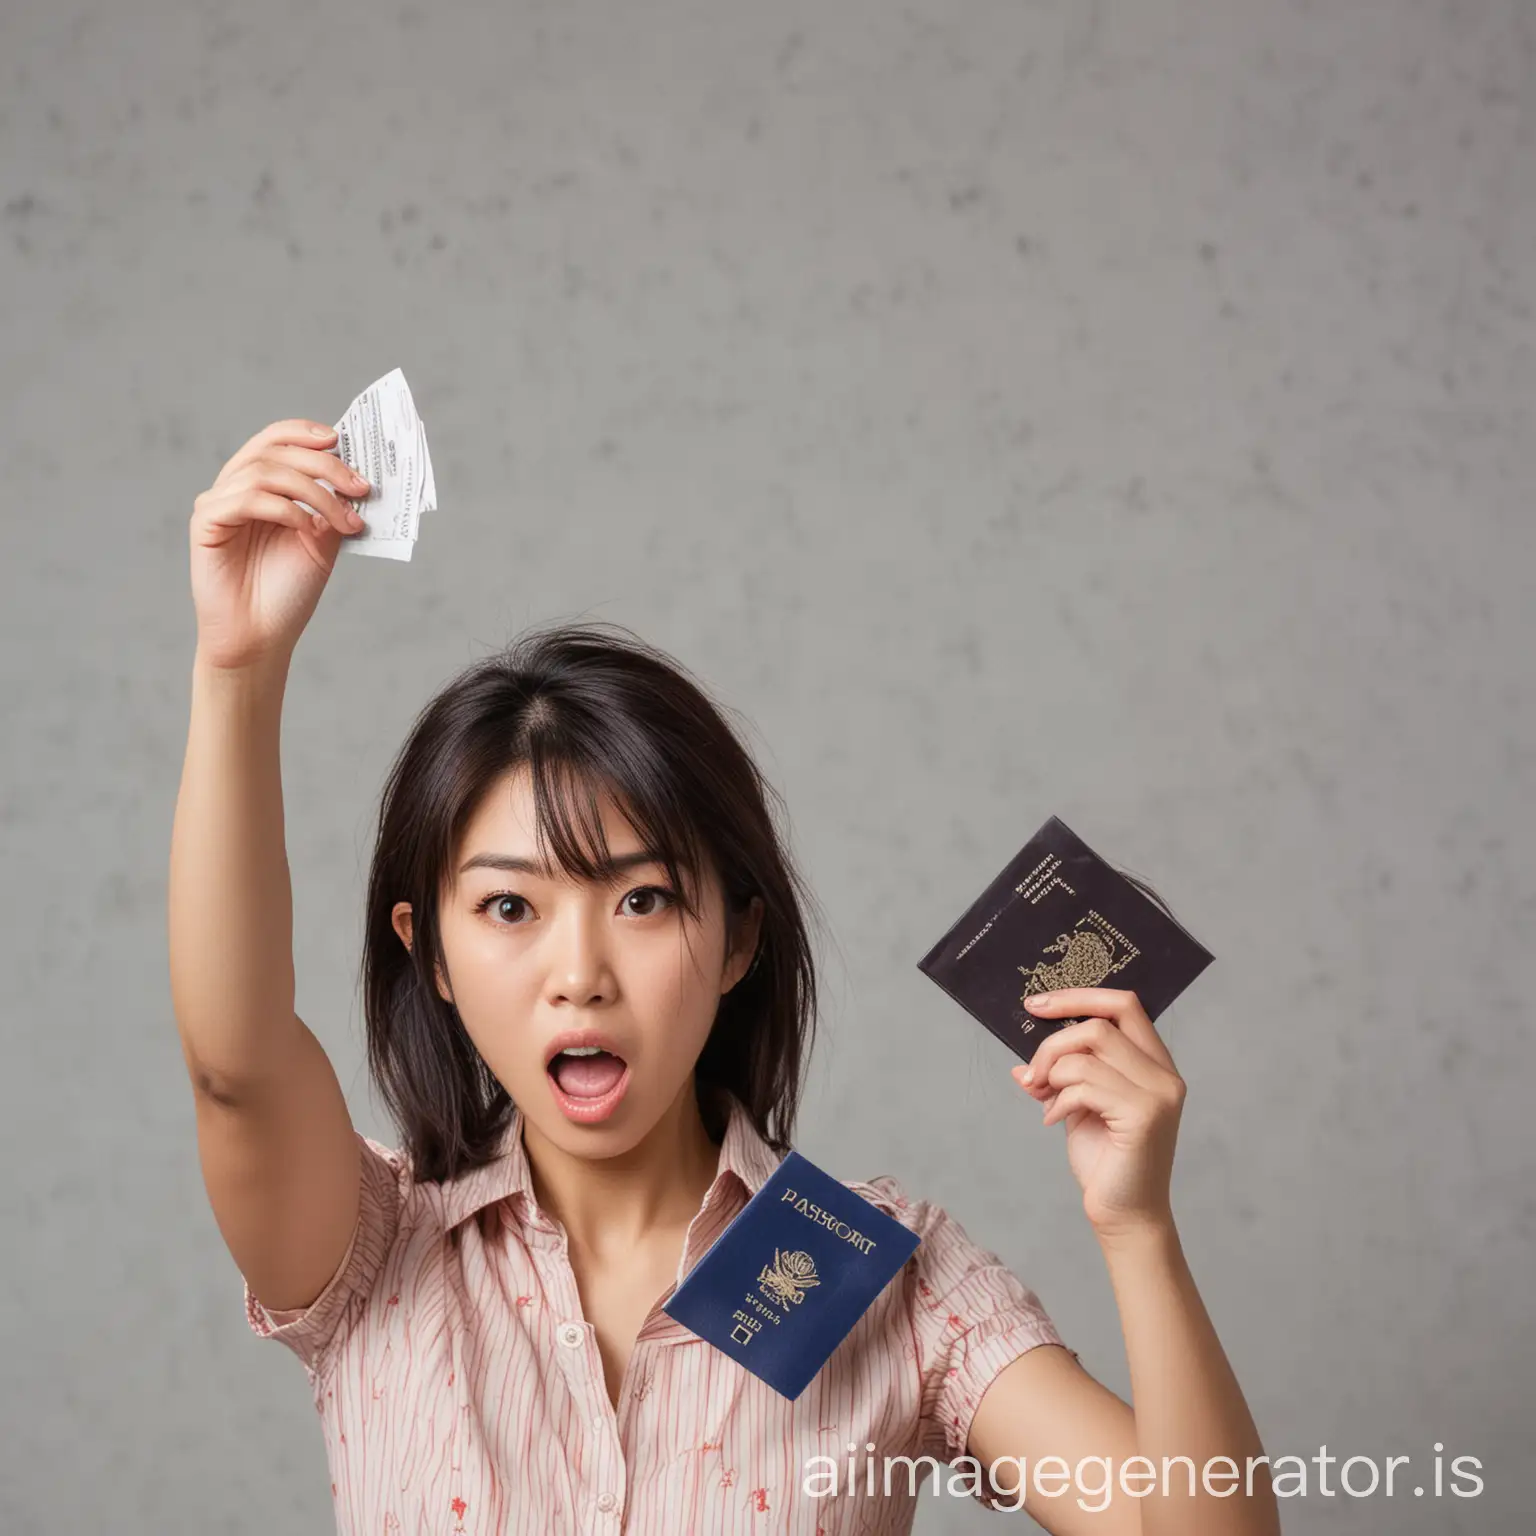 Angry-Japanese-Woman-Throwing-Passport-in-Frustration